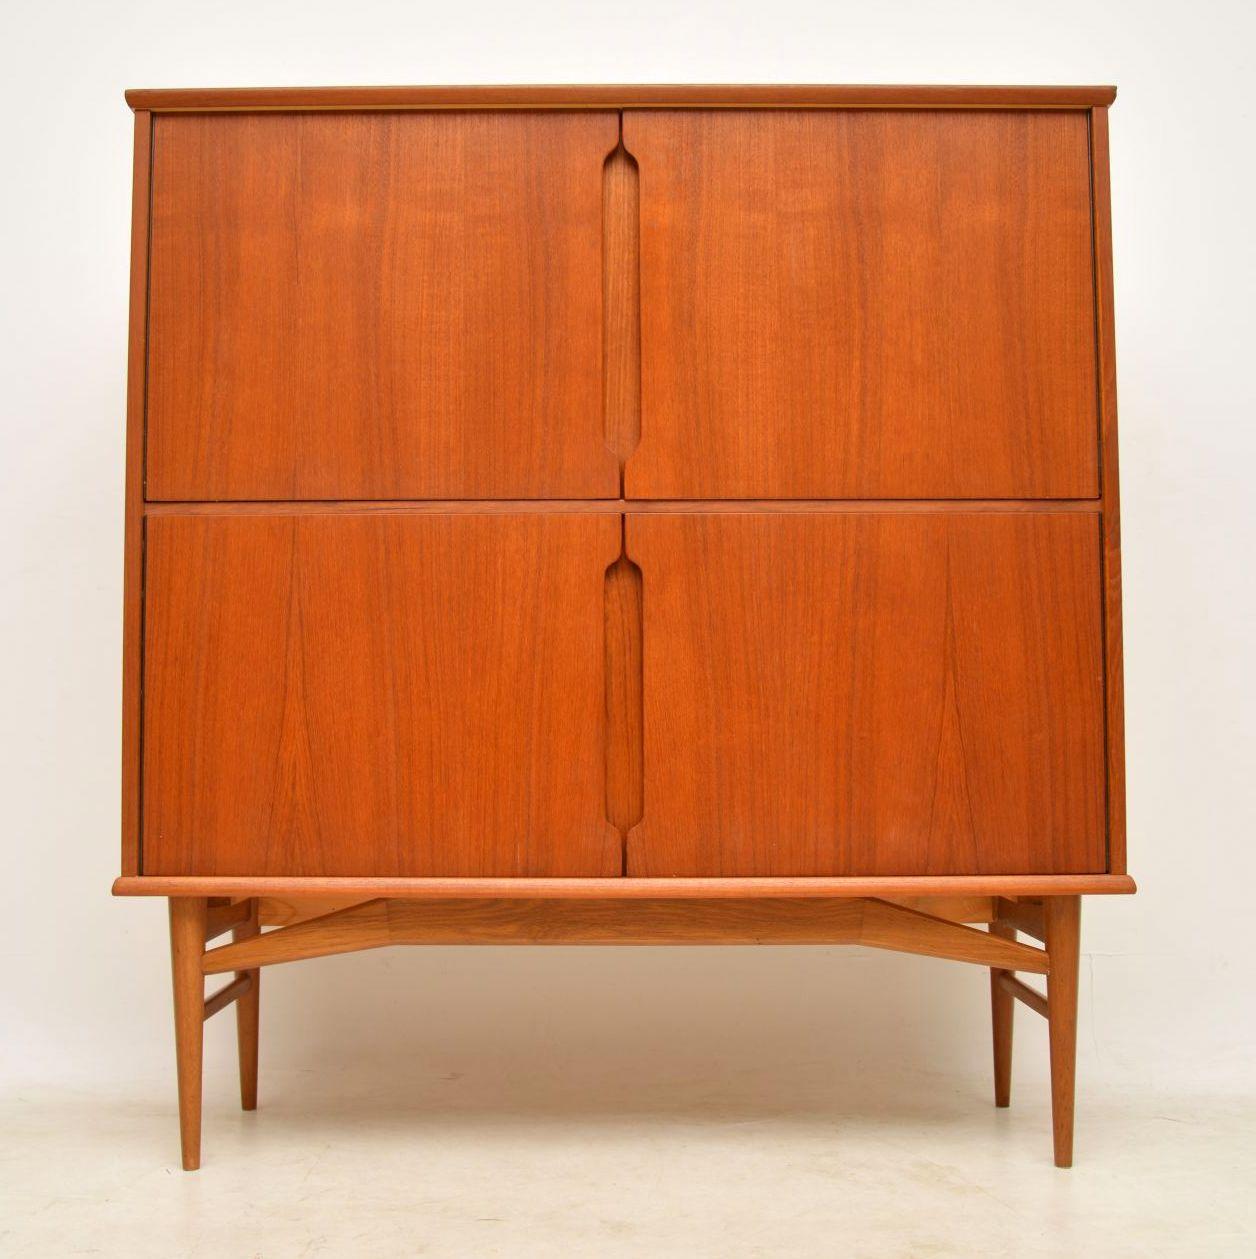 A stunning and extremely well made 1960s vintage cabinet in teak, this was made in Denmark, this model is called ‘Fredericia’. It is in superb condition for its age, it is clean, sturdy and sound. There has been a tiny repair to the veneer on the